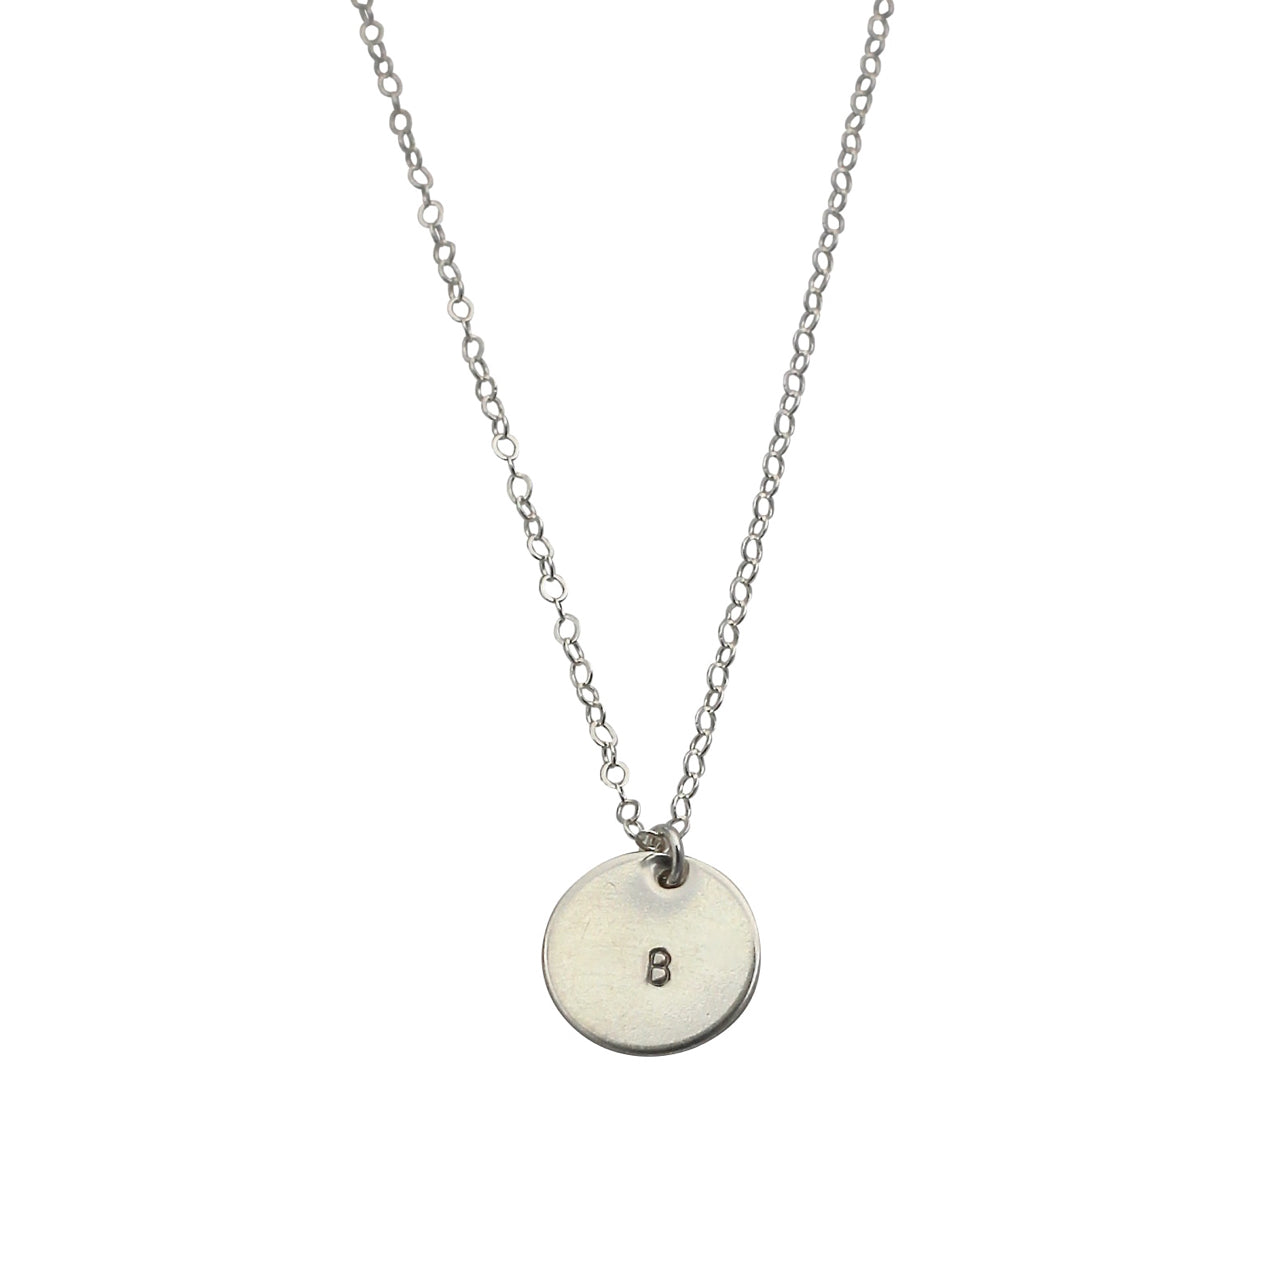 Silver Initial This necklace